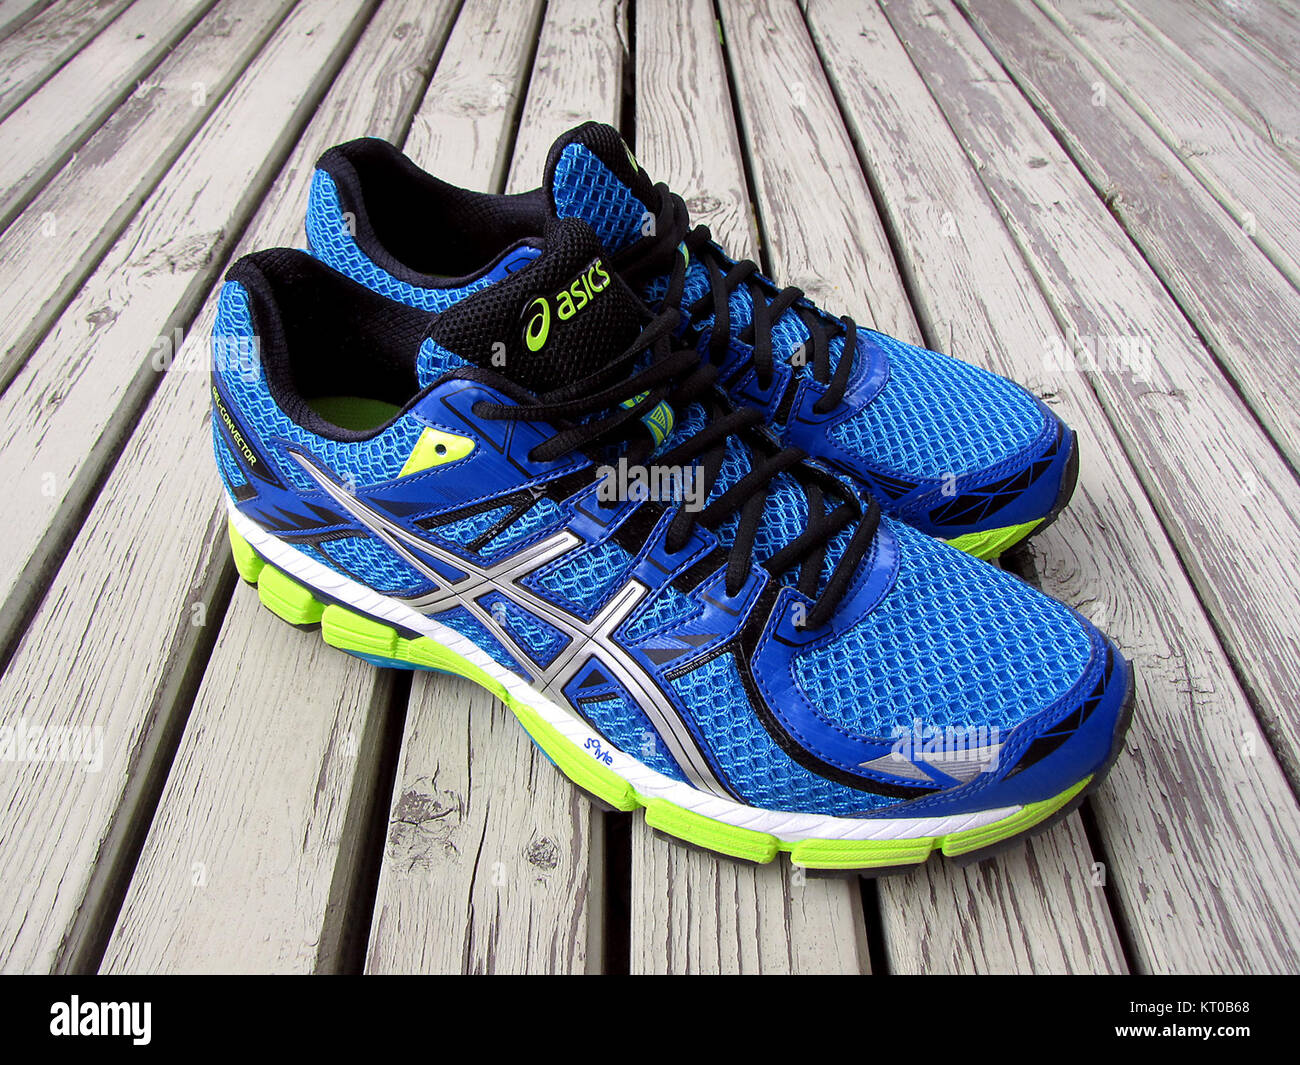 Asics Gel High Resolution Stock Photography and Images - Alamy